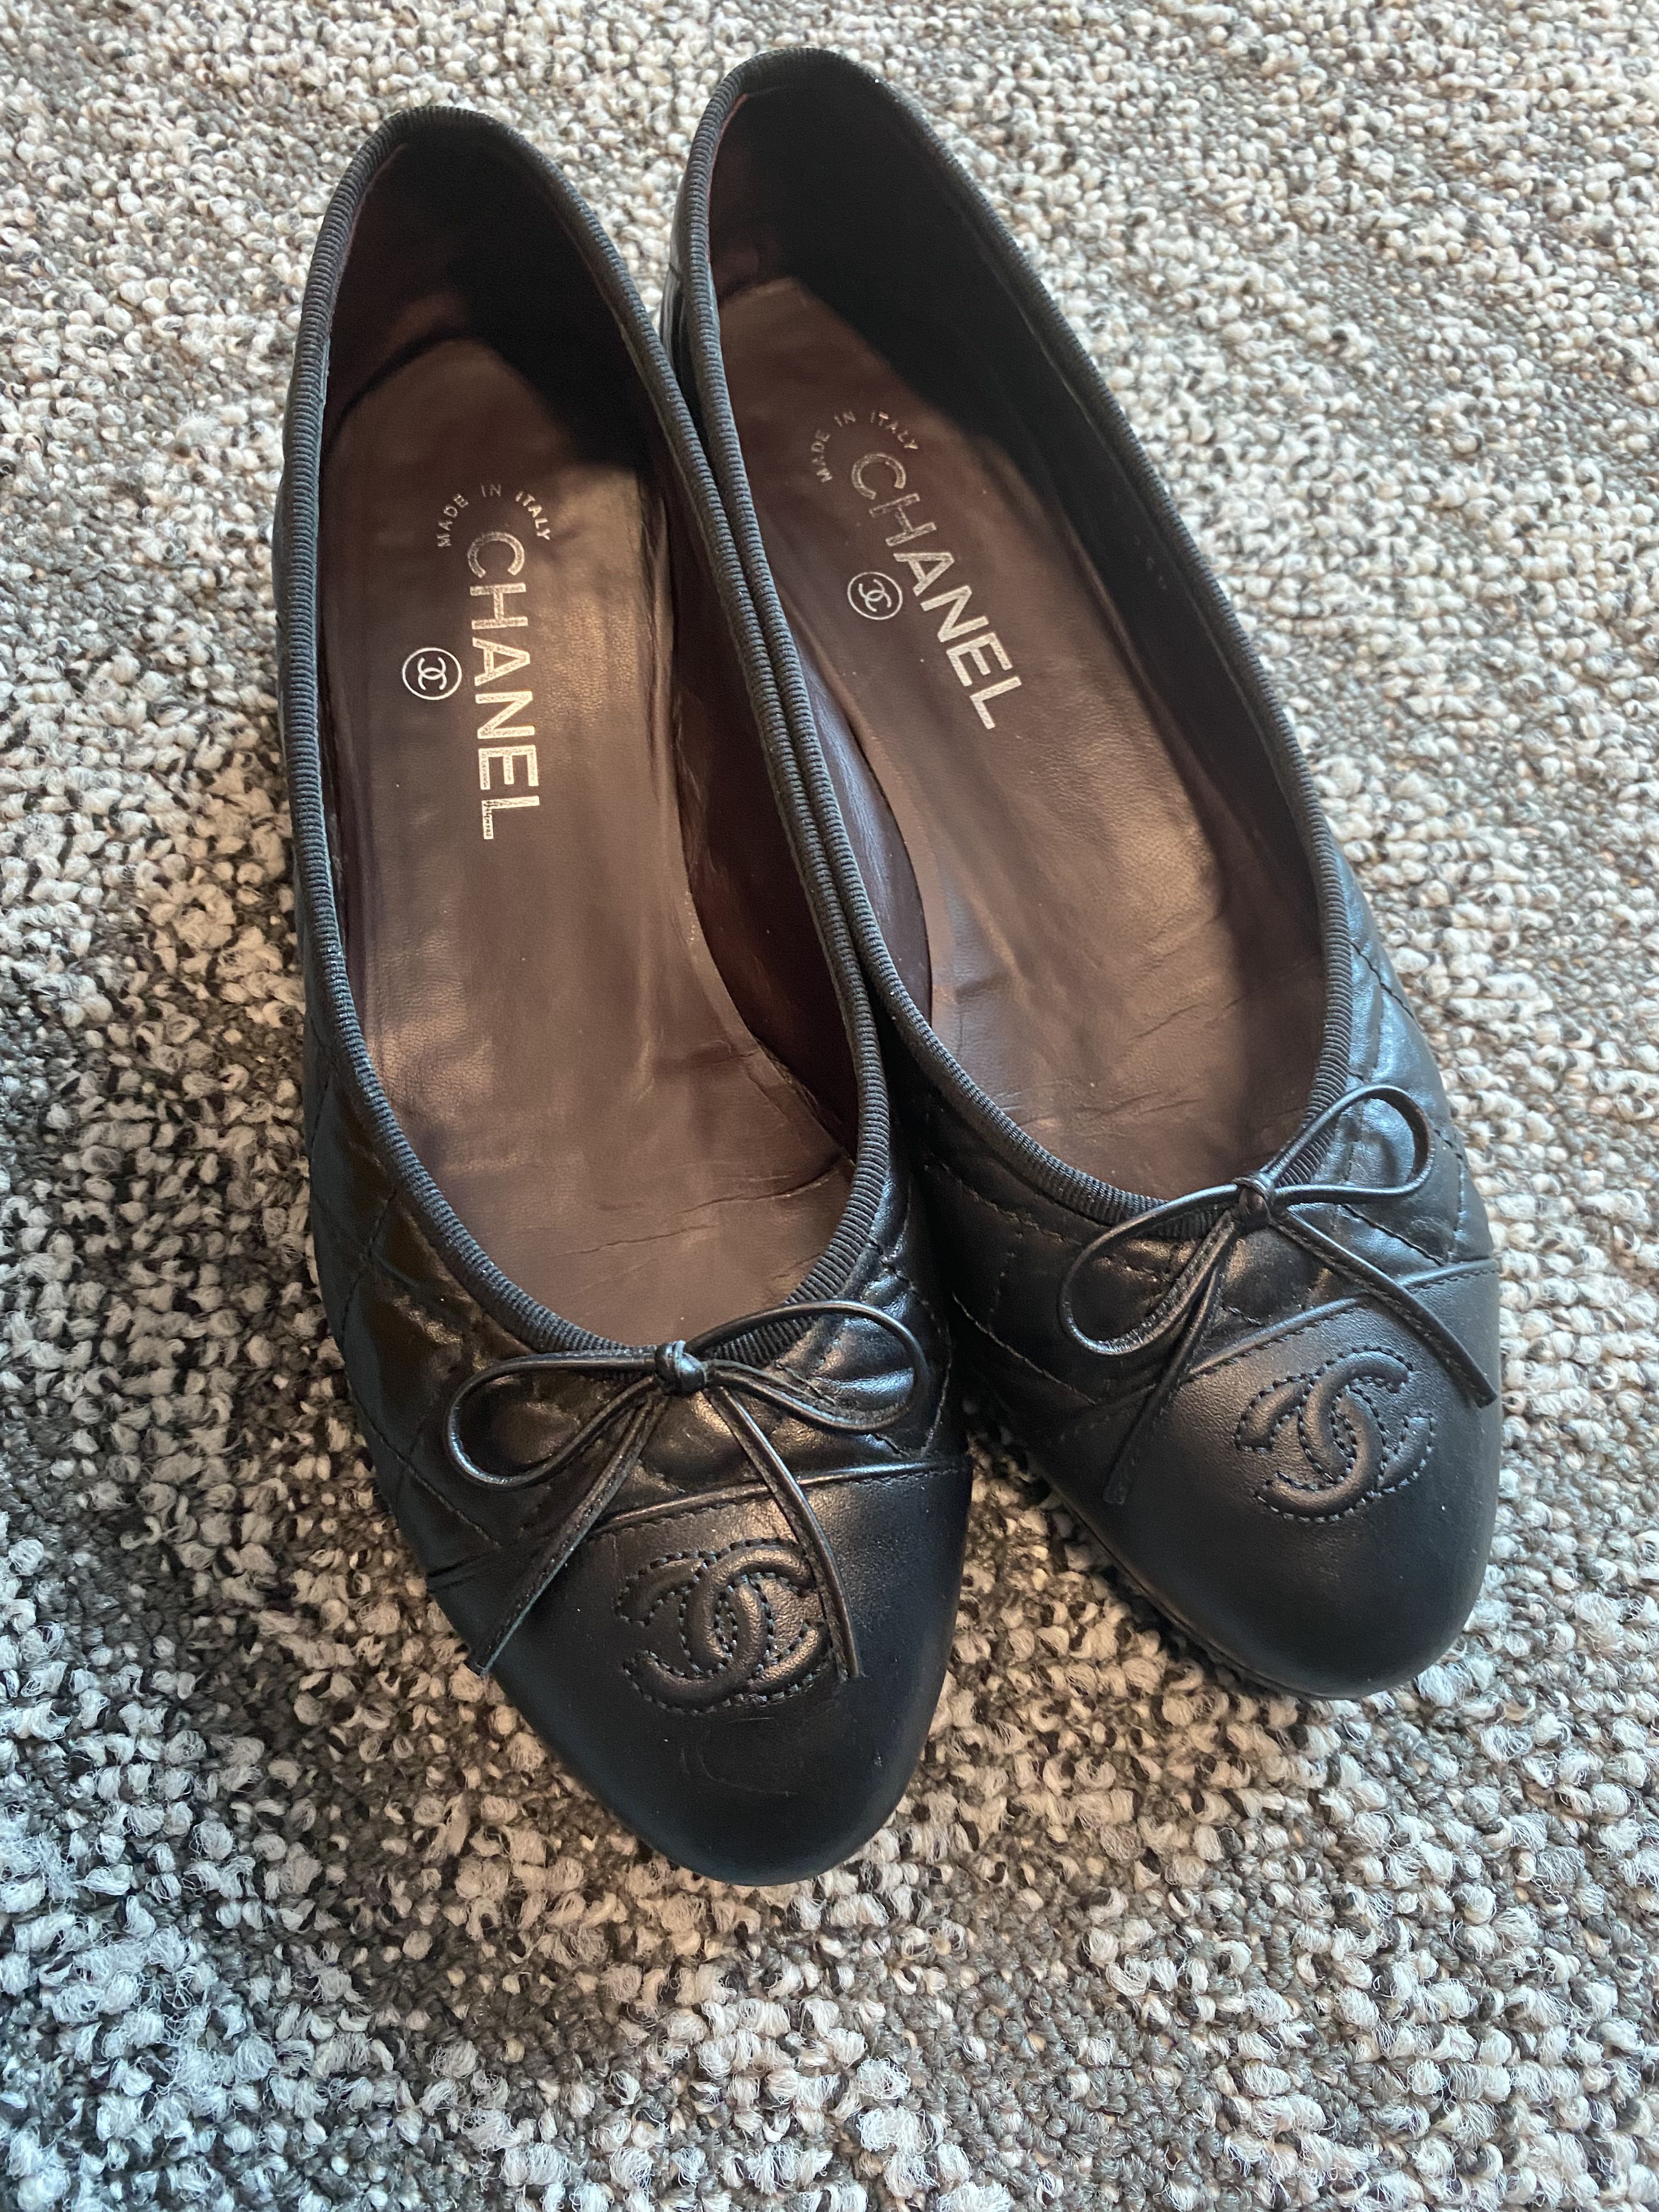 Rare Brand New Chanel Ballerina Size 39 Metalic Silver Shoes For